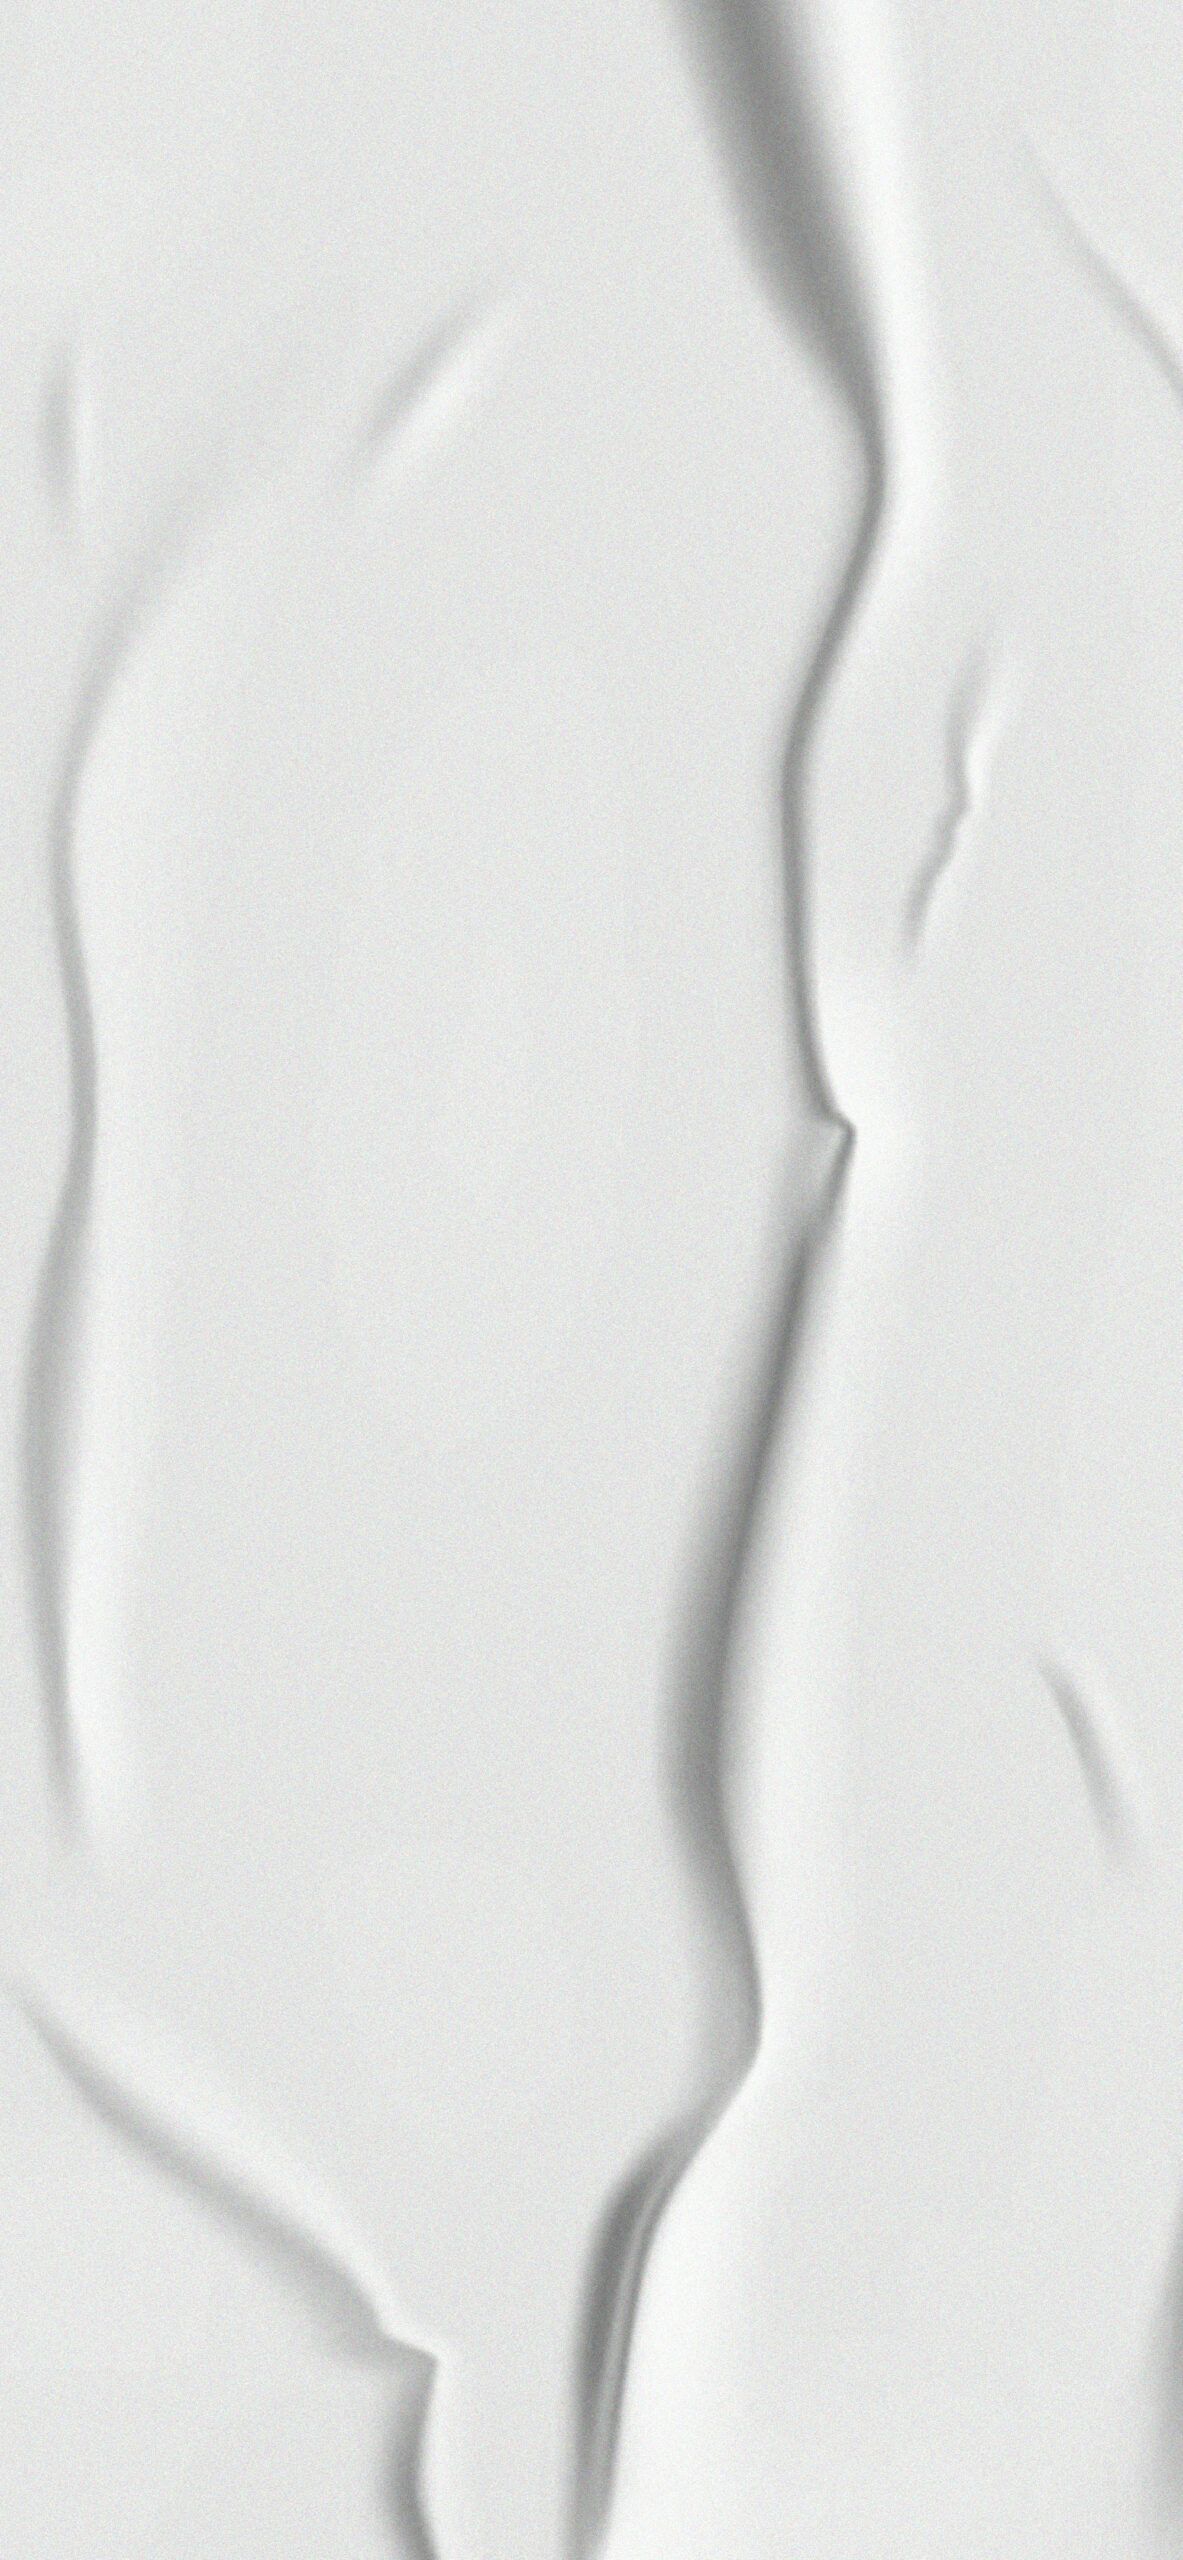 A close up of a white wall with some interesting lines and shapes. - White, cute white, paper